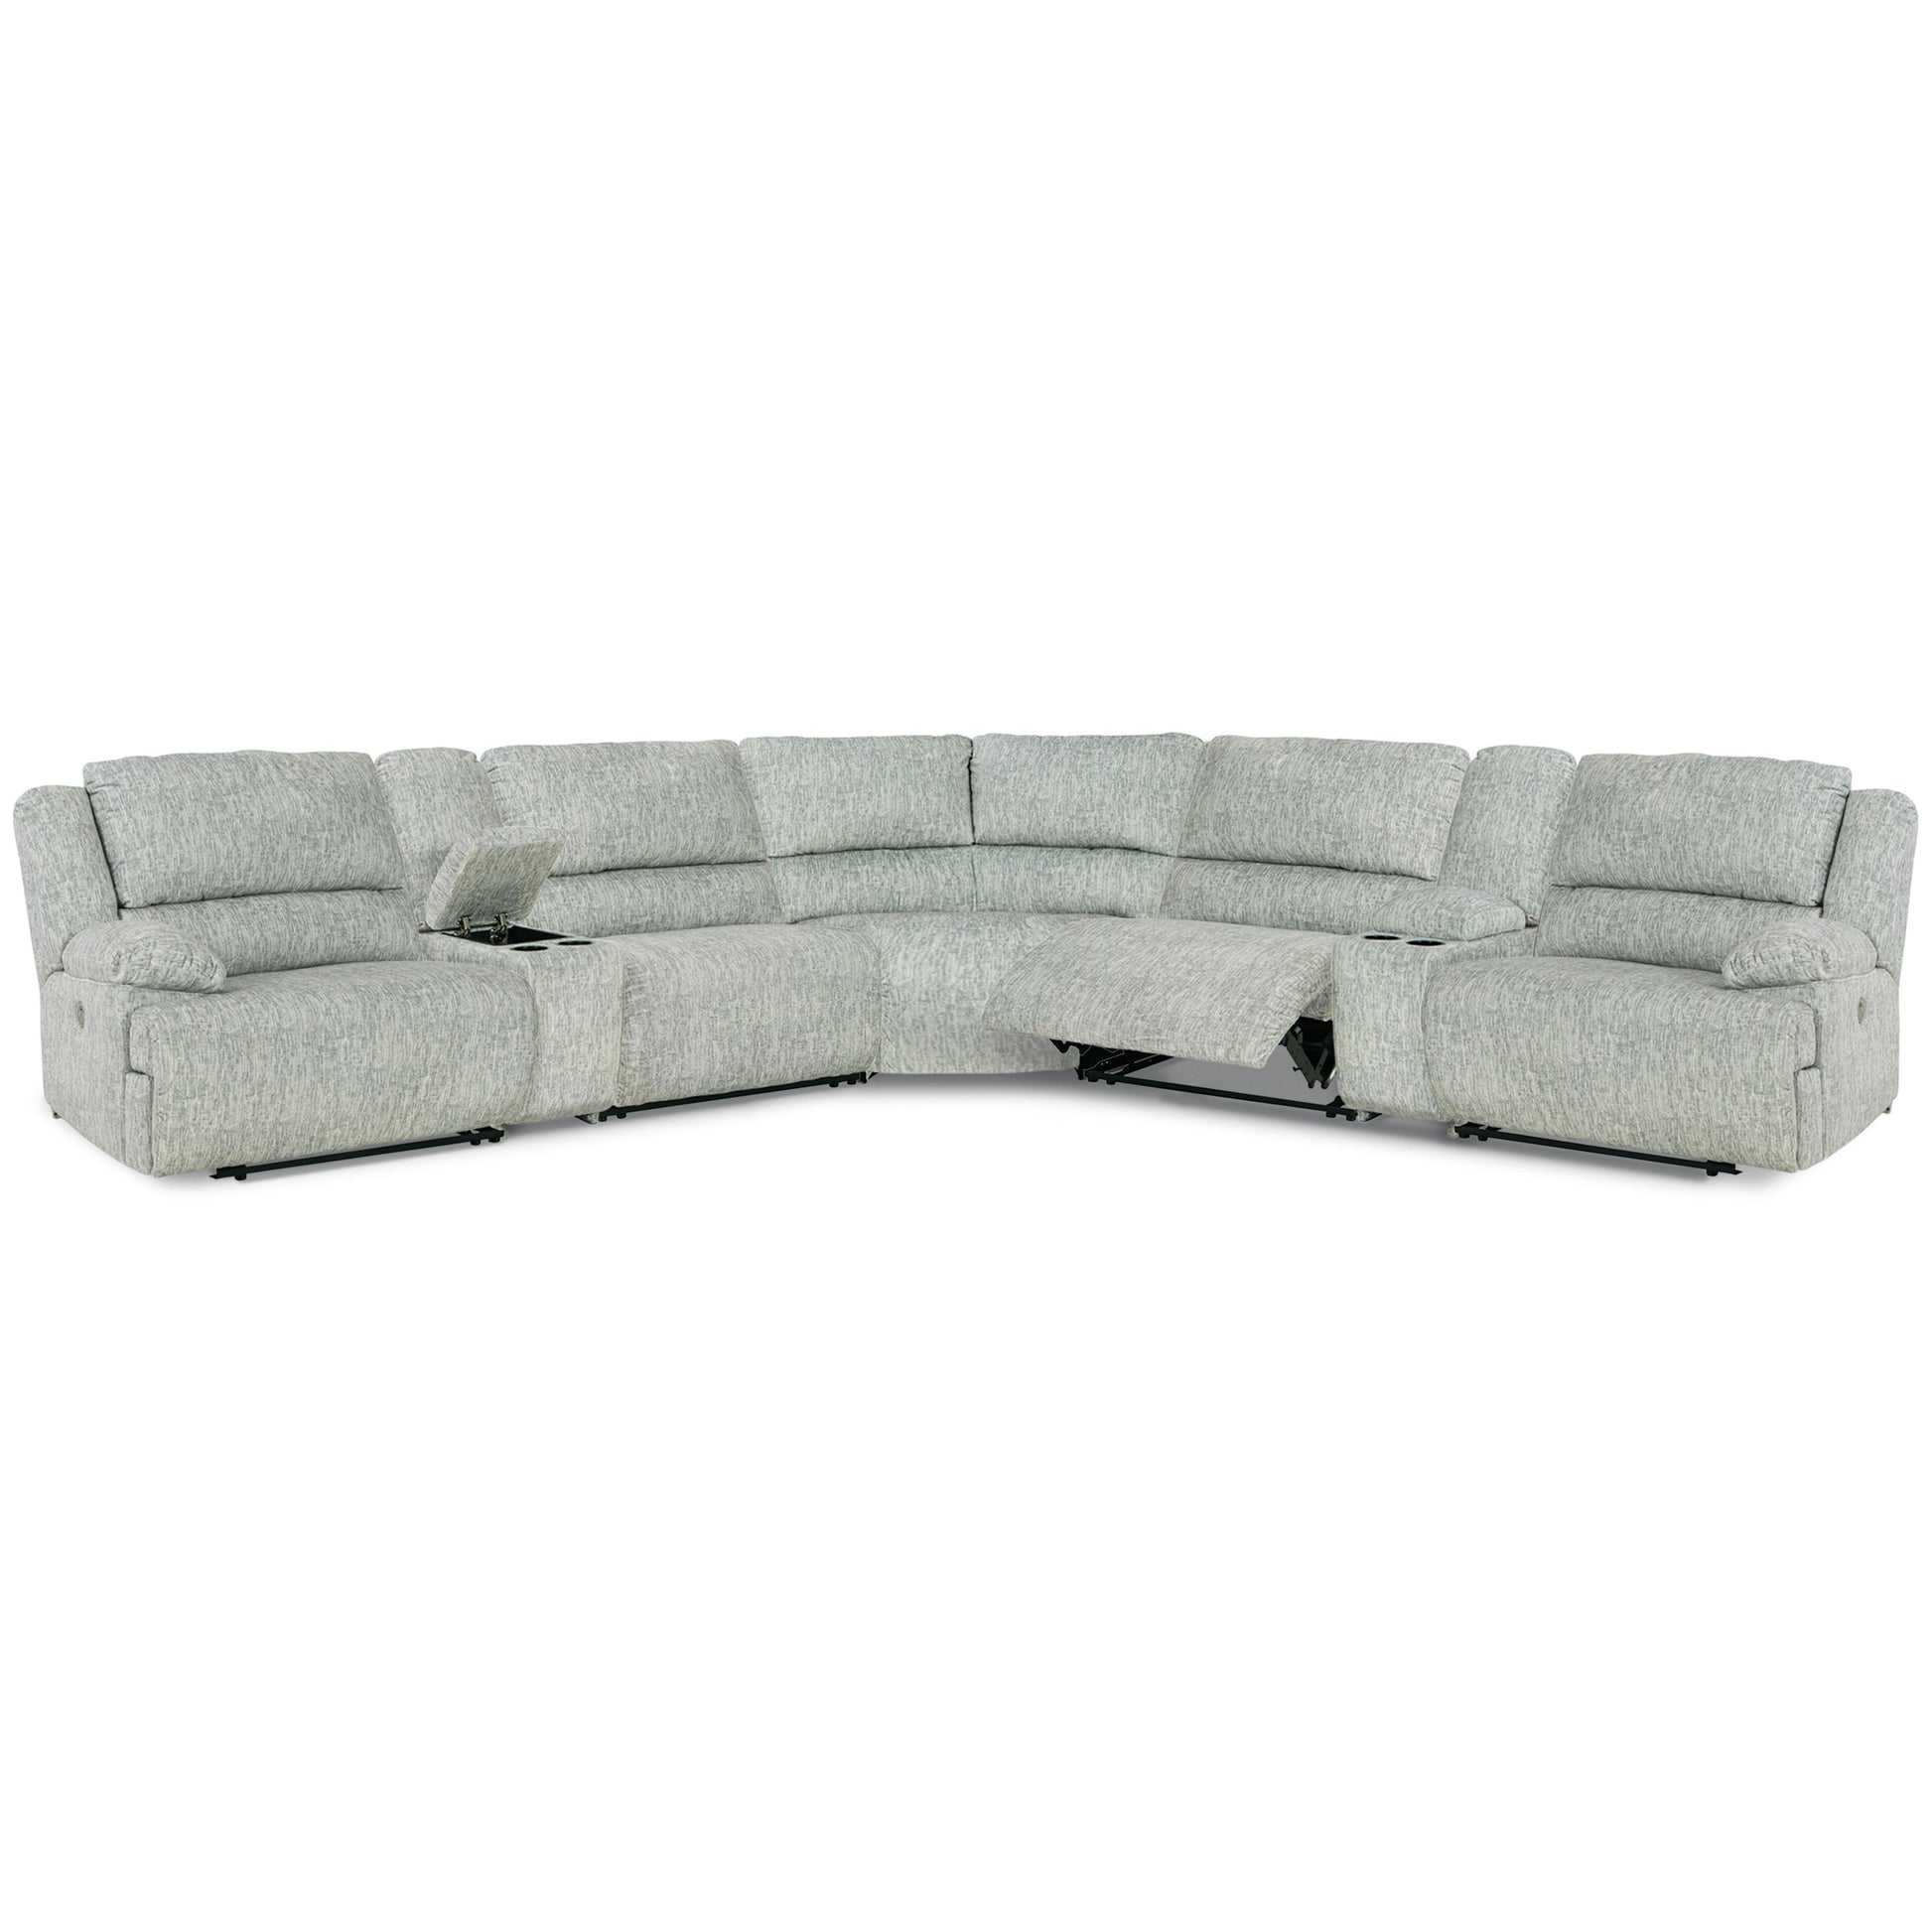 Signature Design by Ashley McClelland Power Reclining Fabric 7 pc Sectional 2930258/2930257/2930219/2930277/2930219/2930257/2930262 IMAGE 1